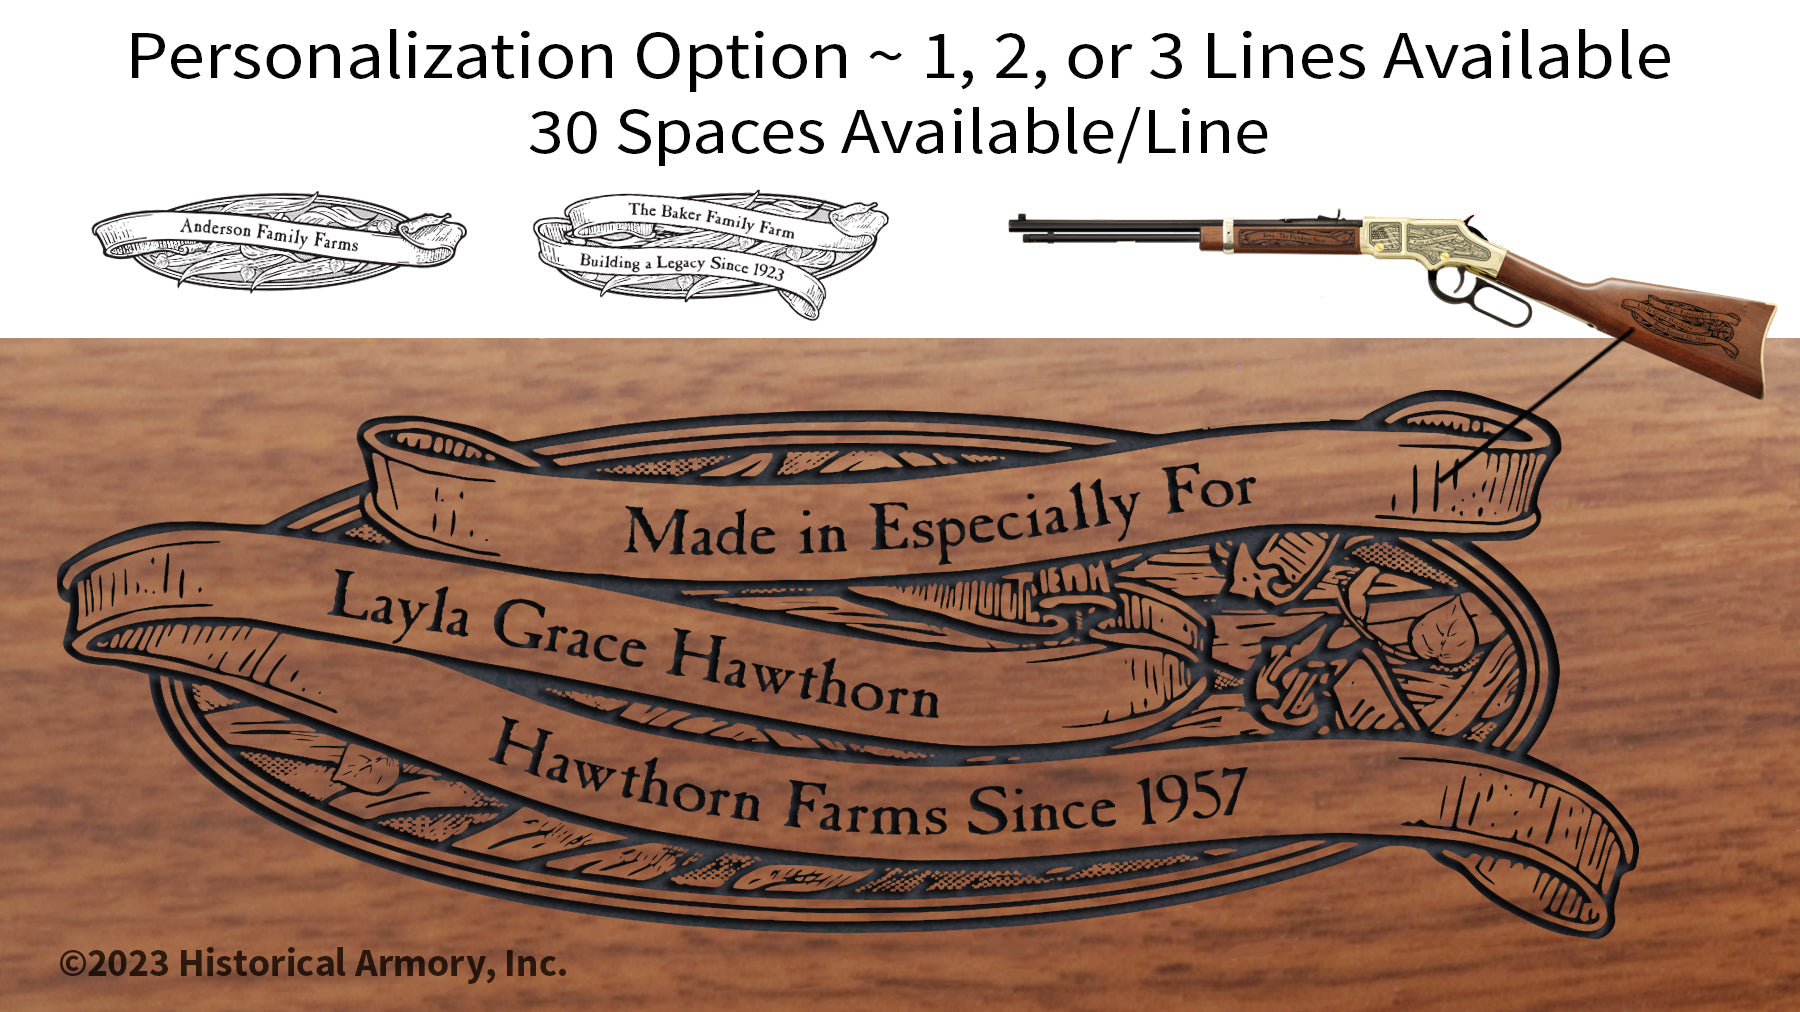 North Dakota Agricultural Heritage Engraved Rifle Personalization